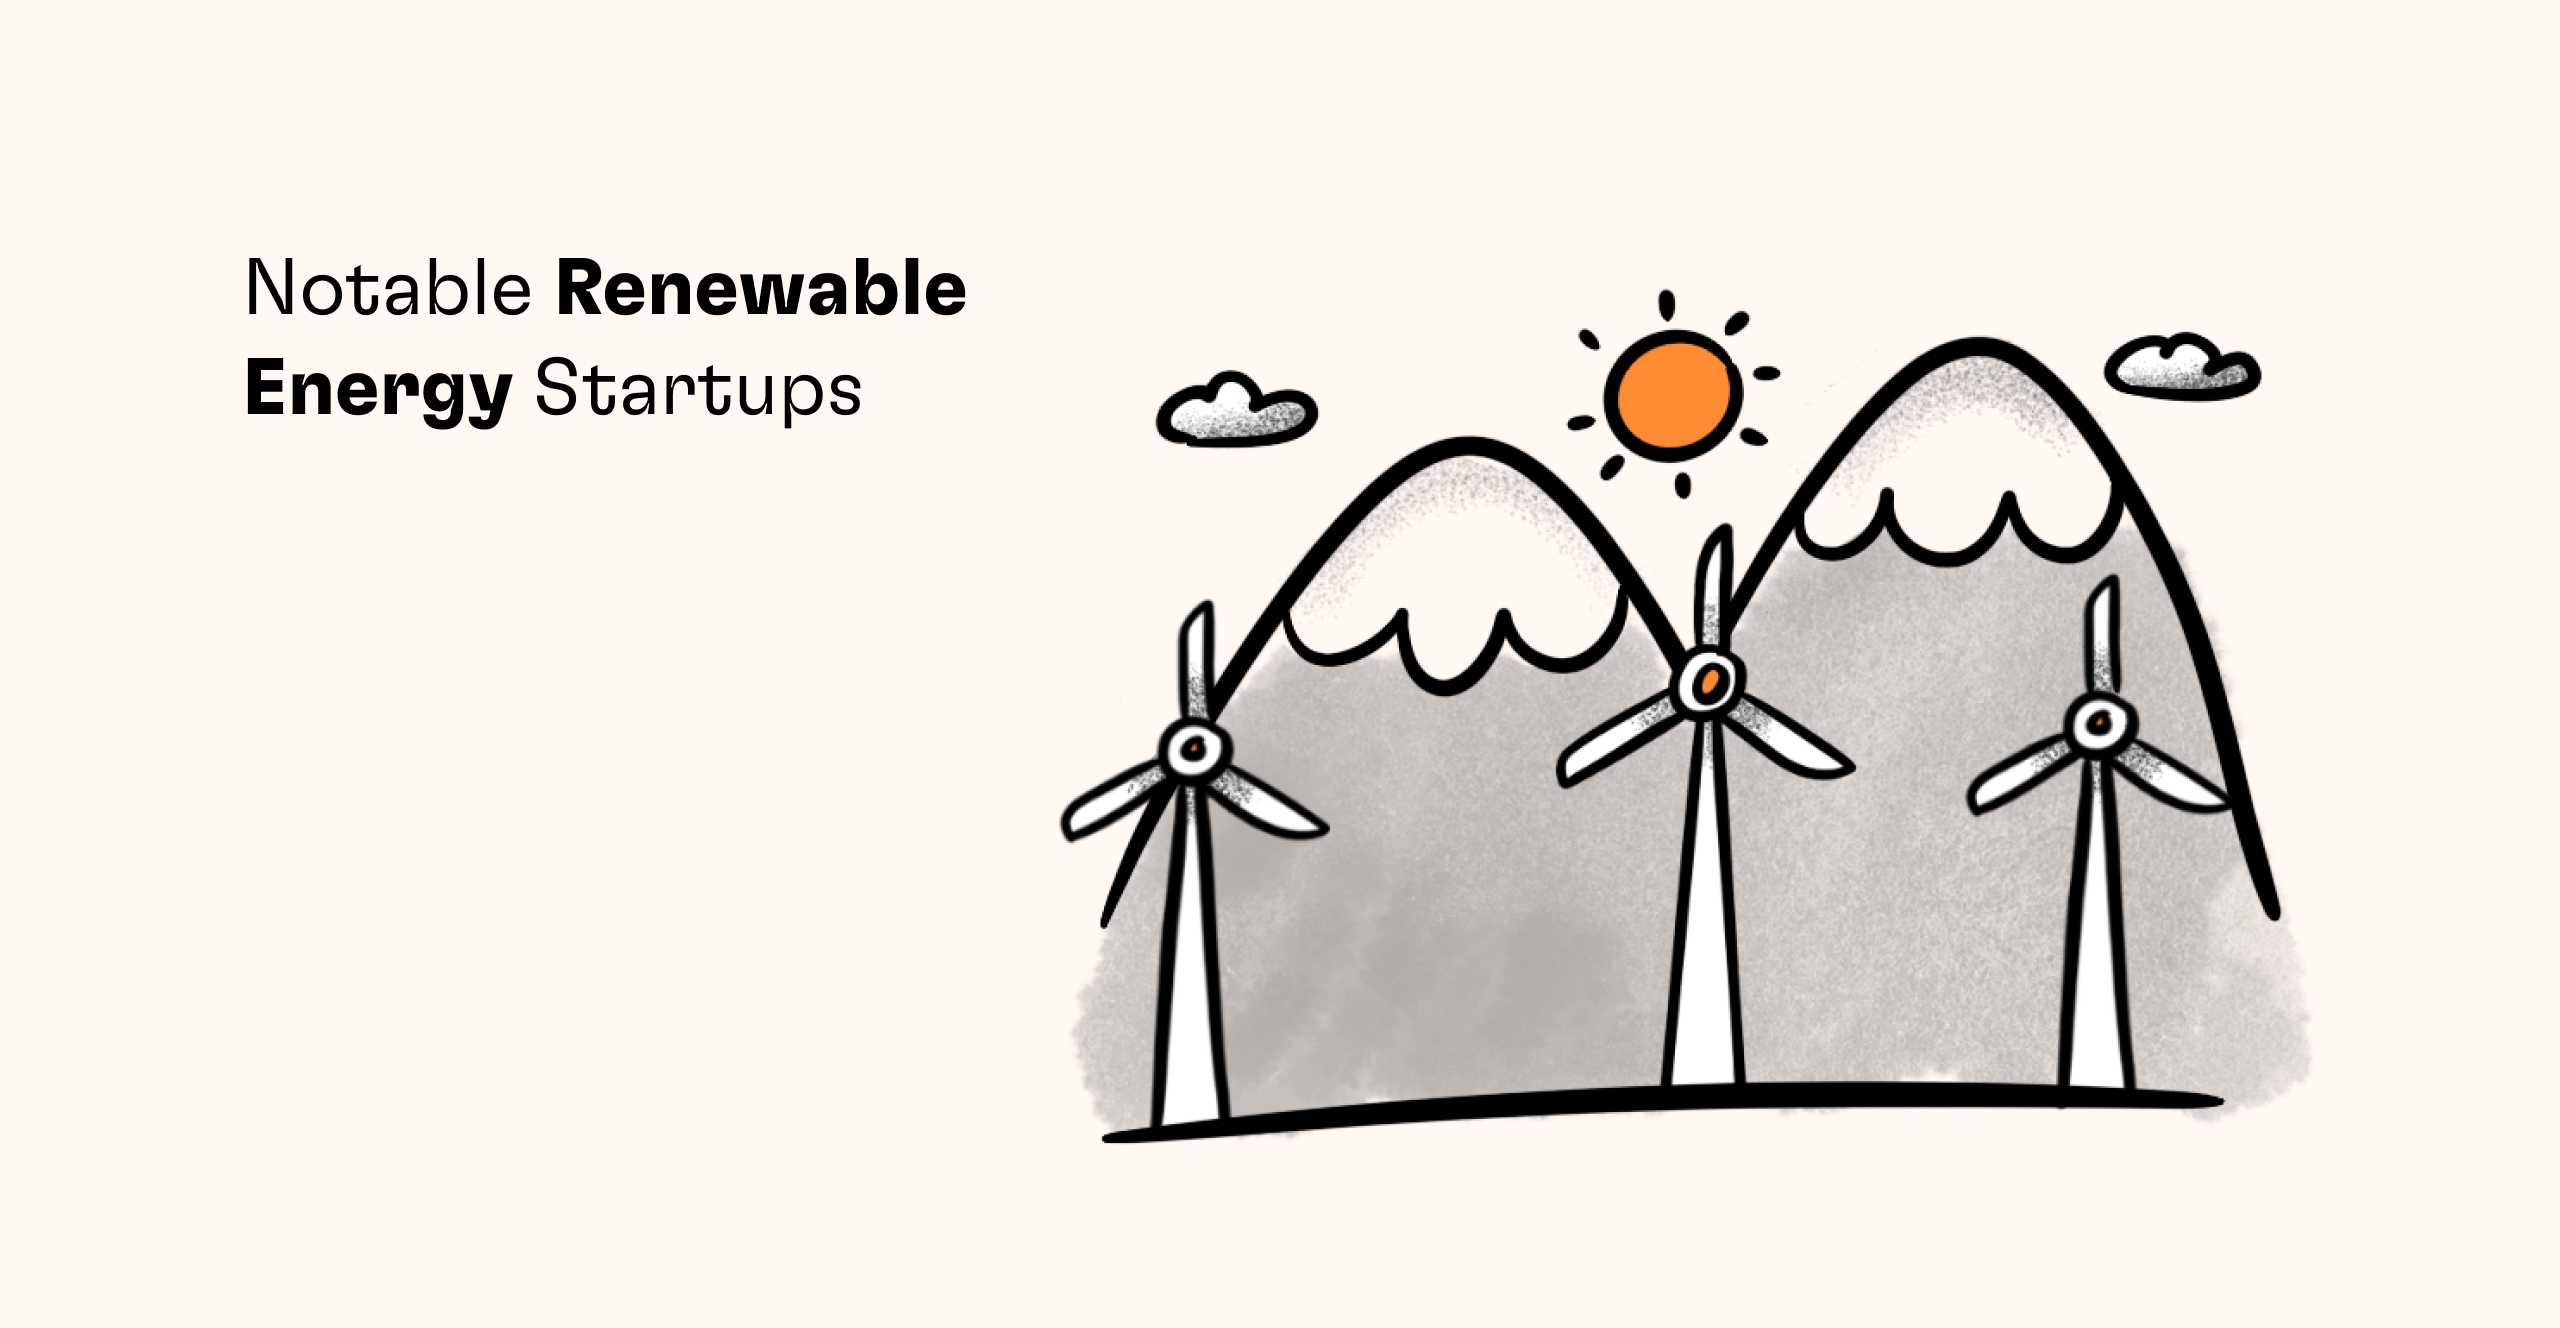 Promising Renewable Energy Startups that Everyone Should Follow